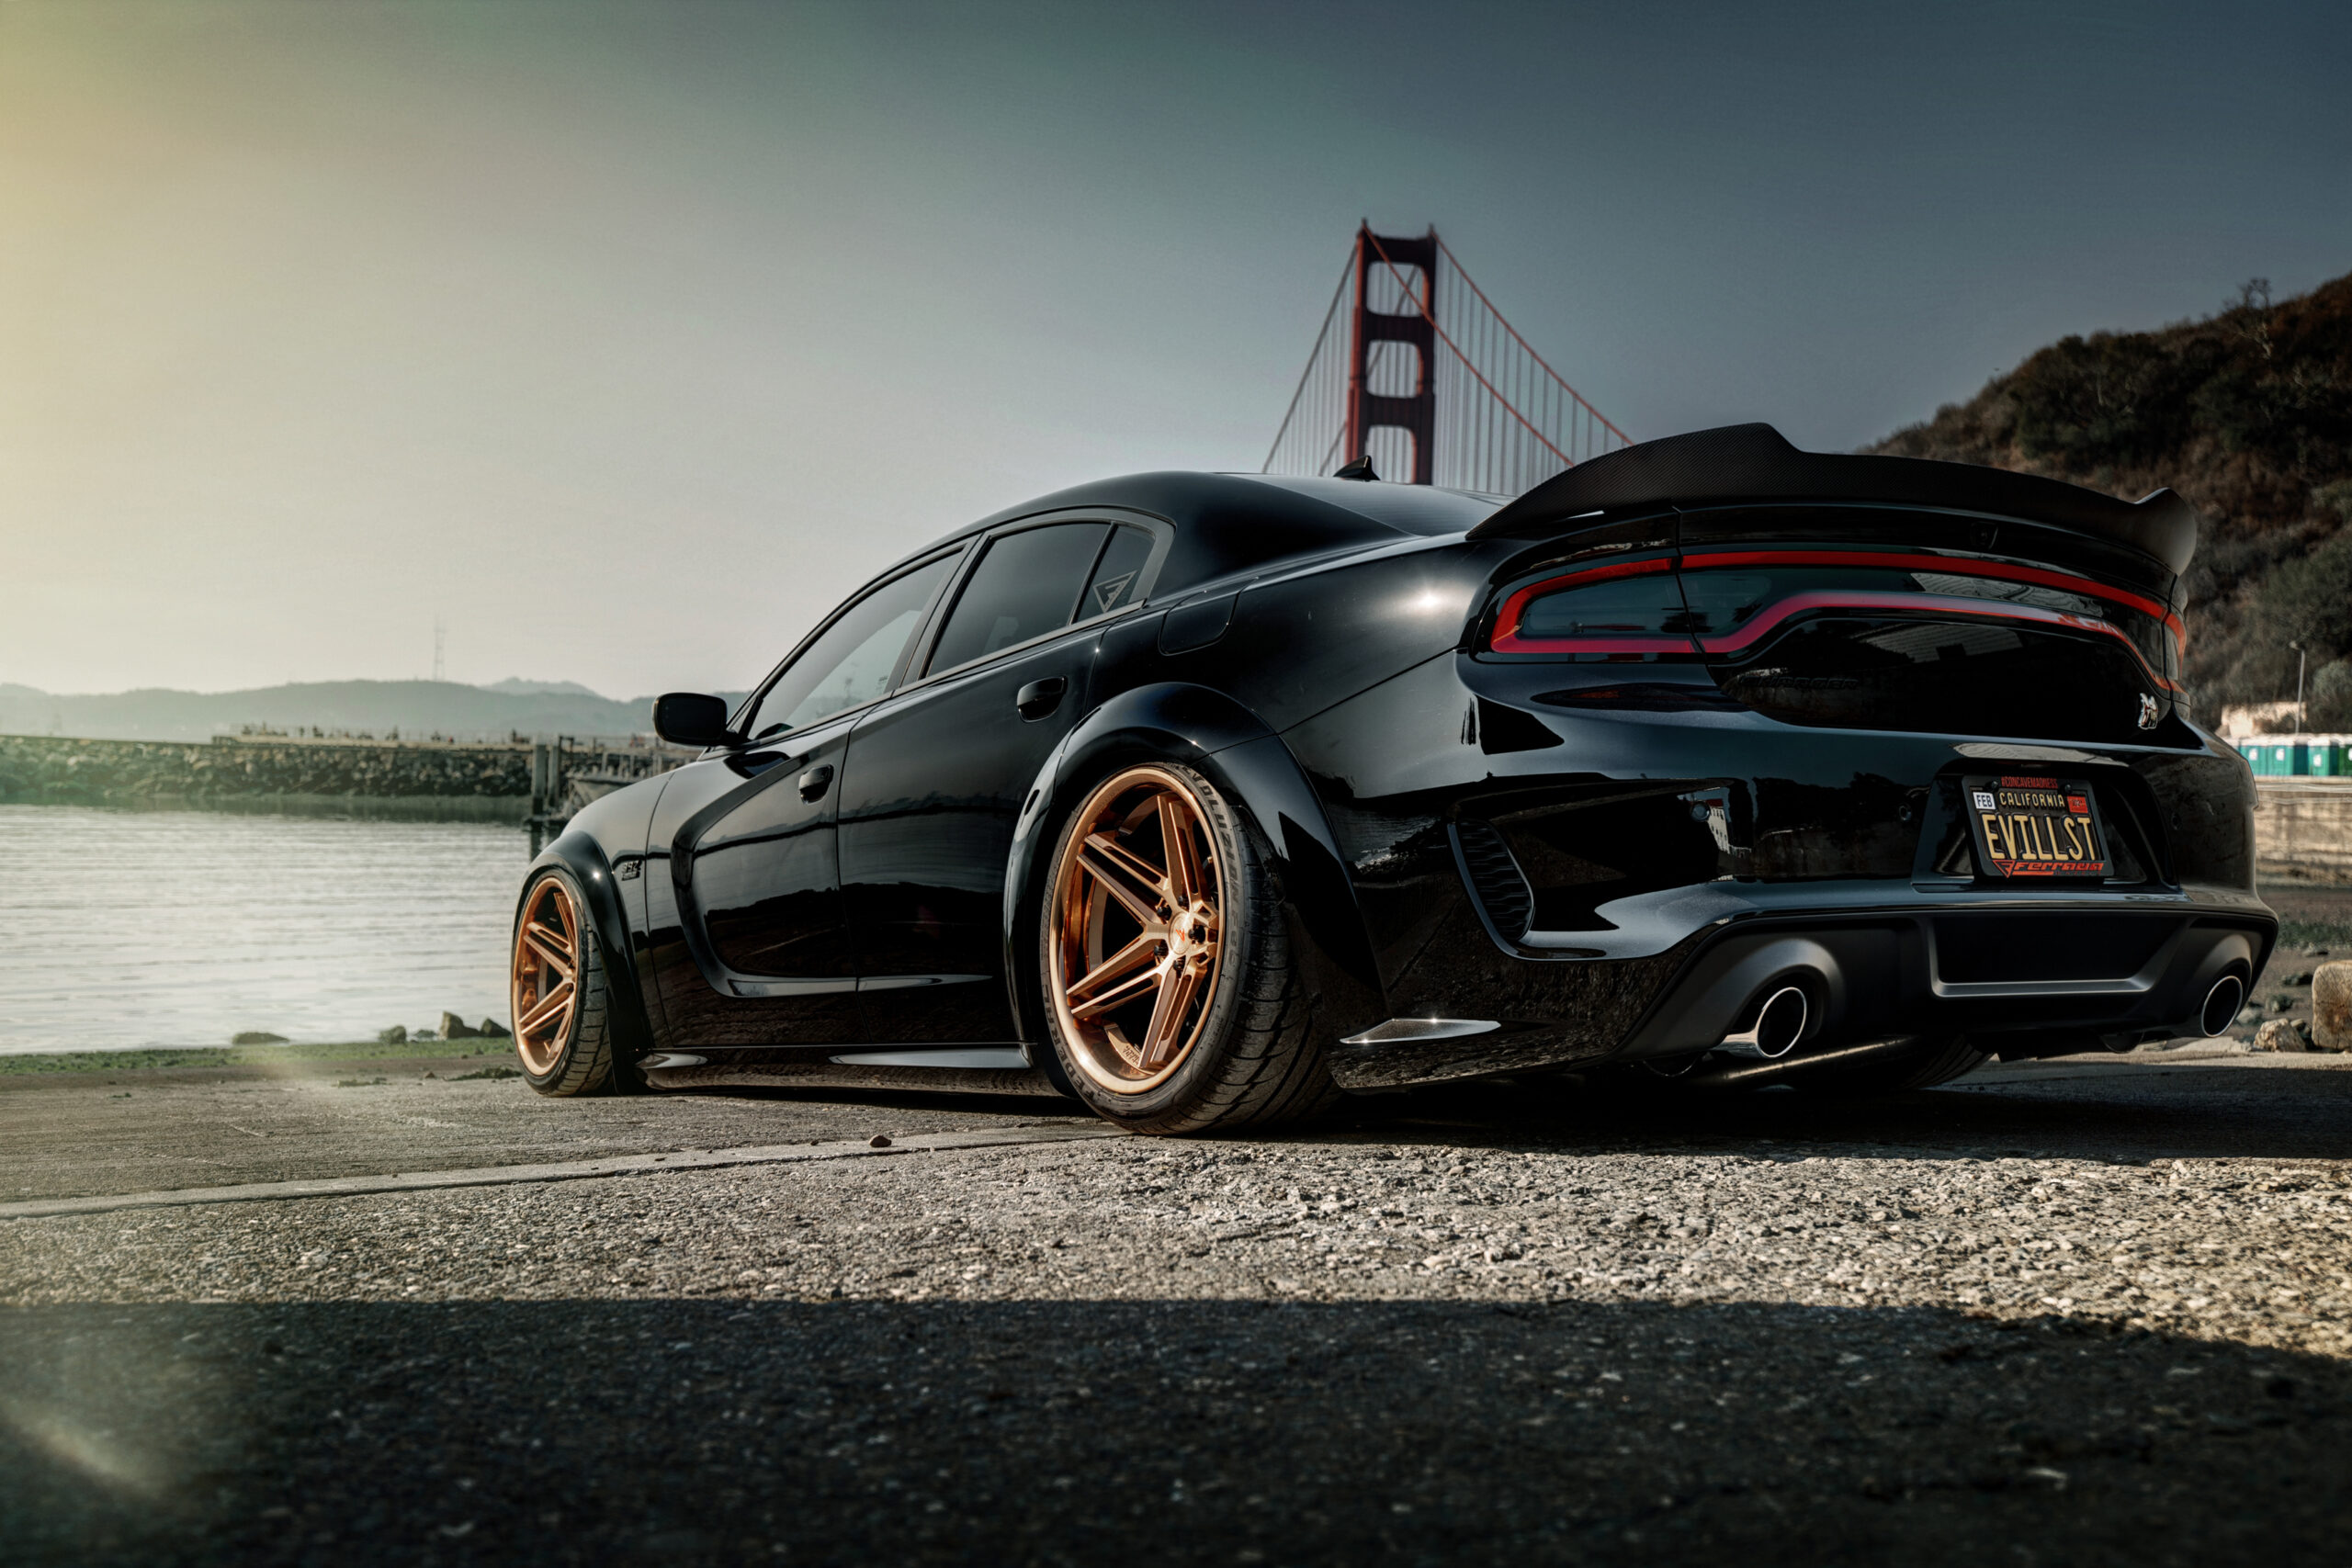 2020 Dodge Charger Widebody Scatpack - CM1 BCP